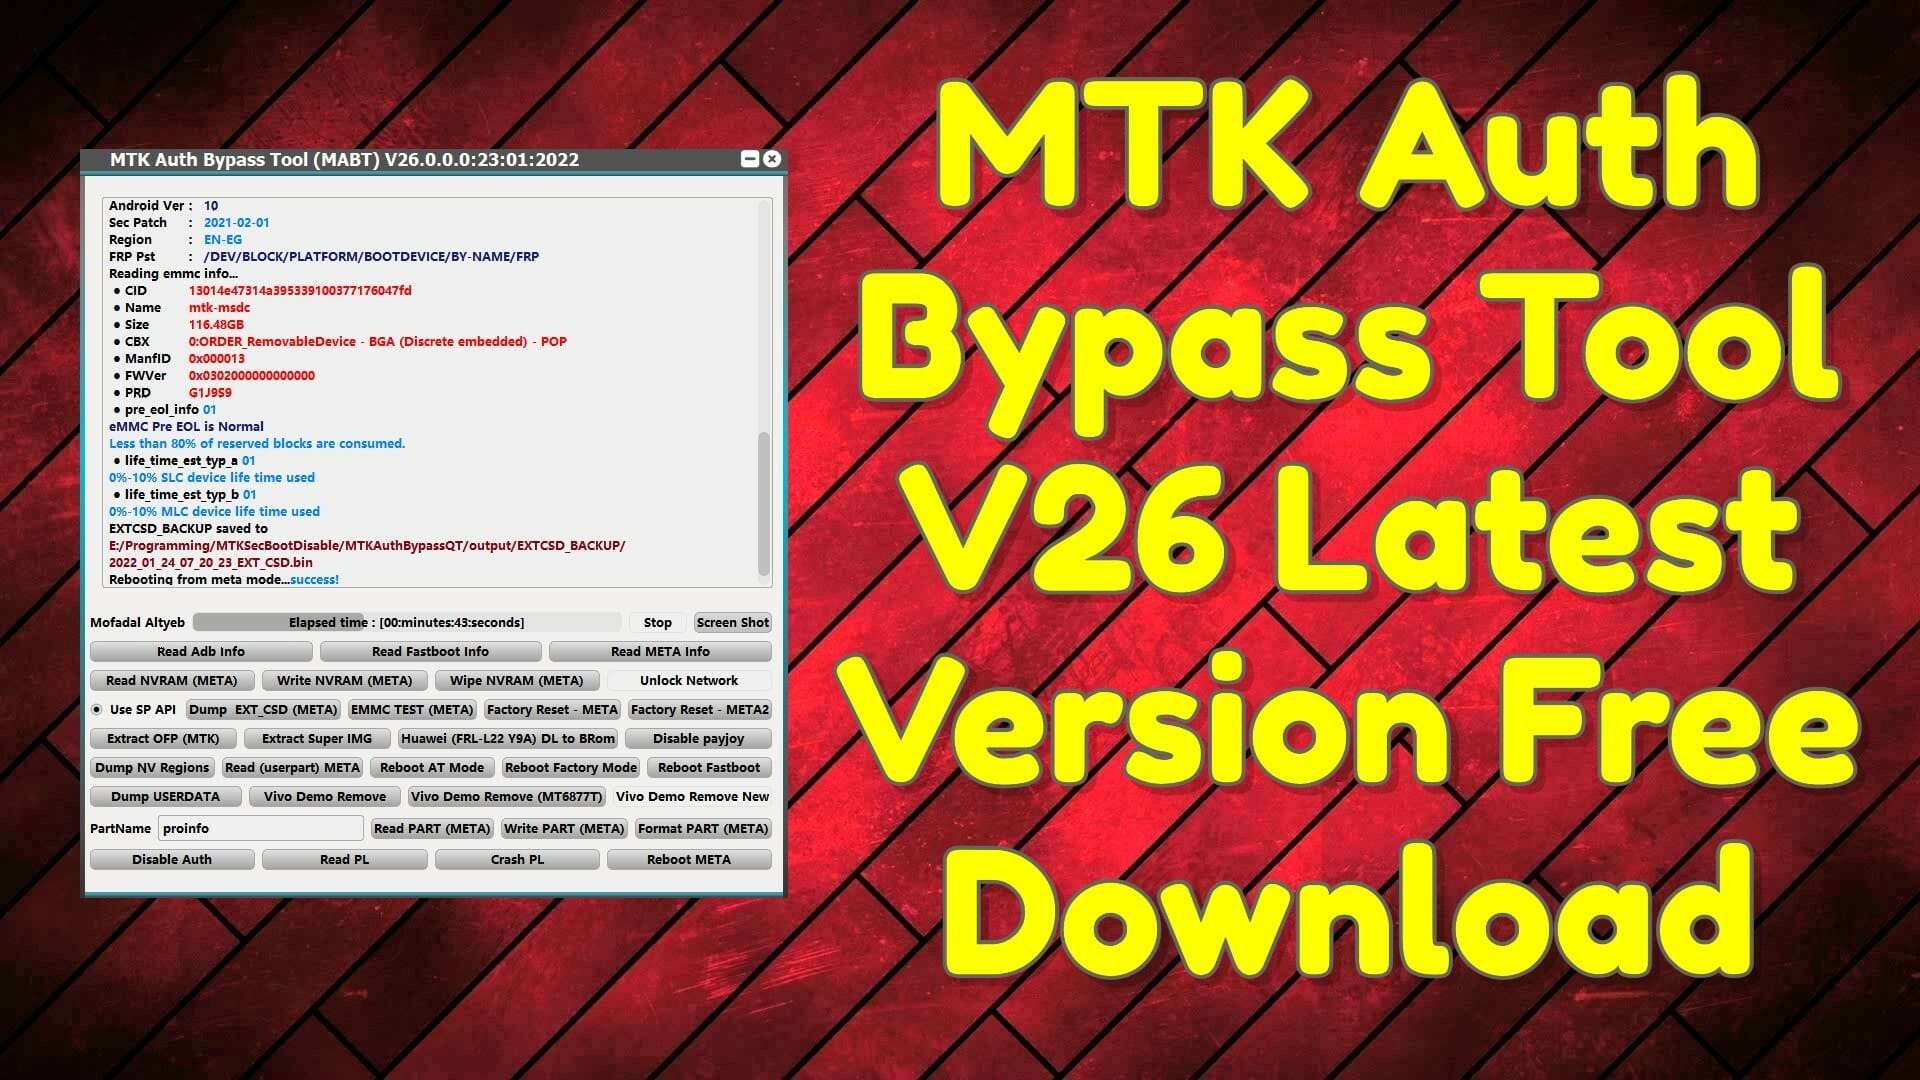 Mtk auth bypass tool v26 latest version free download